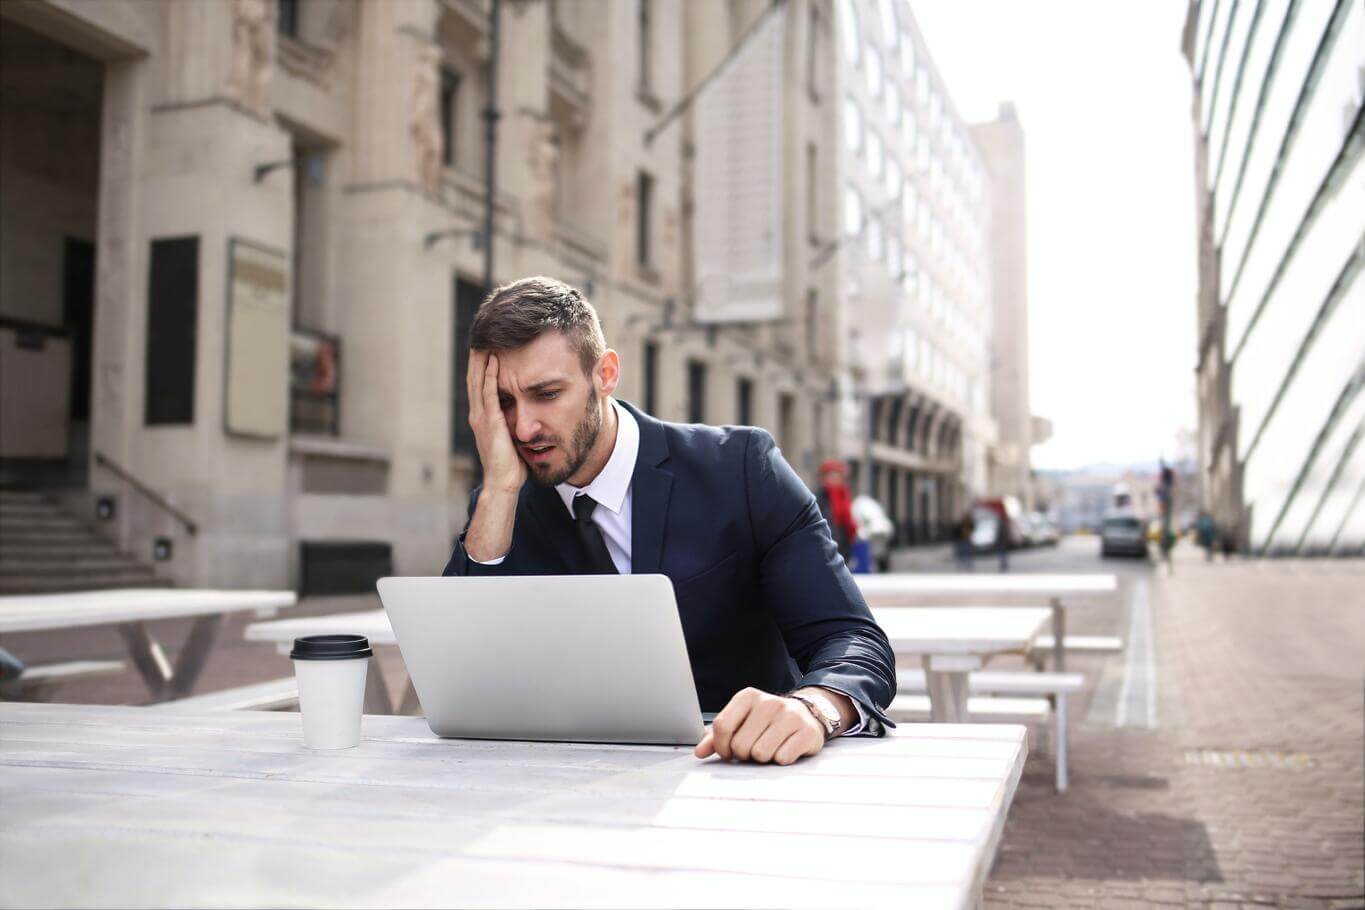 A disappointed lawyer using his laptop outside